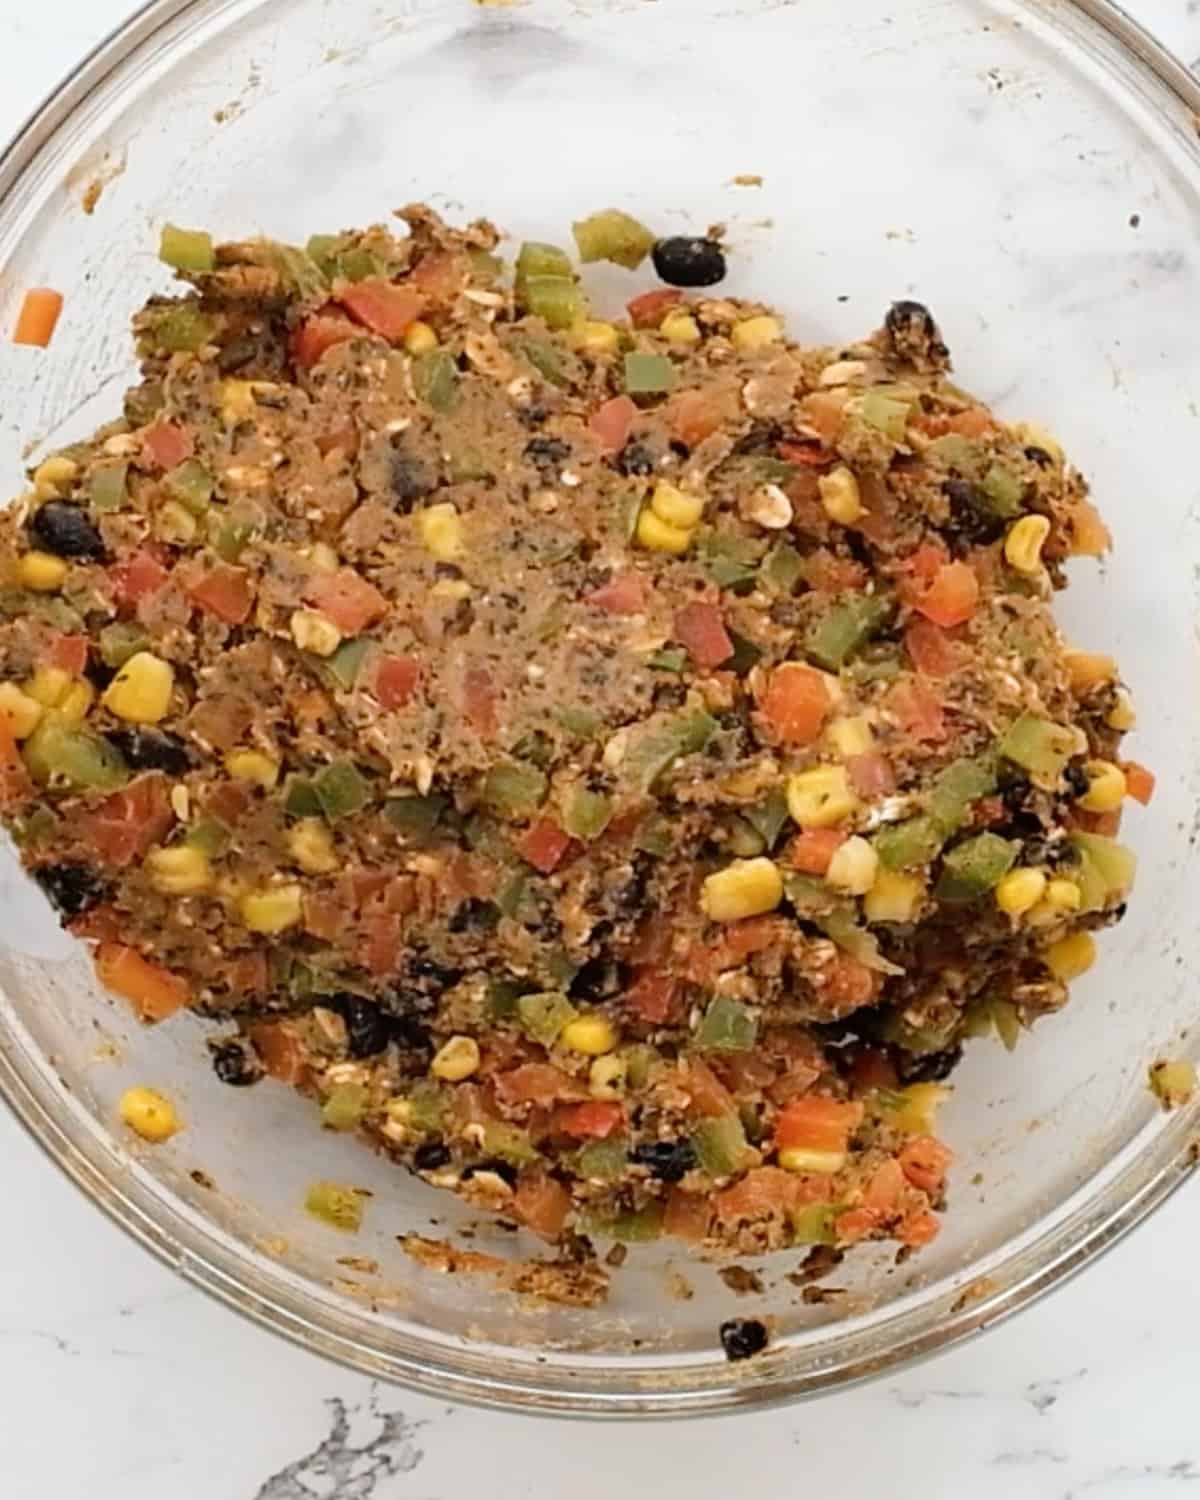 How to Make Sweet Potato Black Bean Burgers - mixture after stirring in vegetables